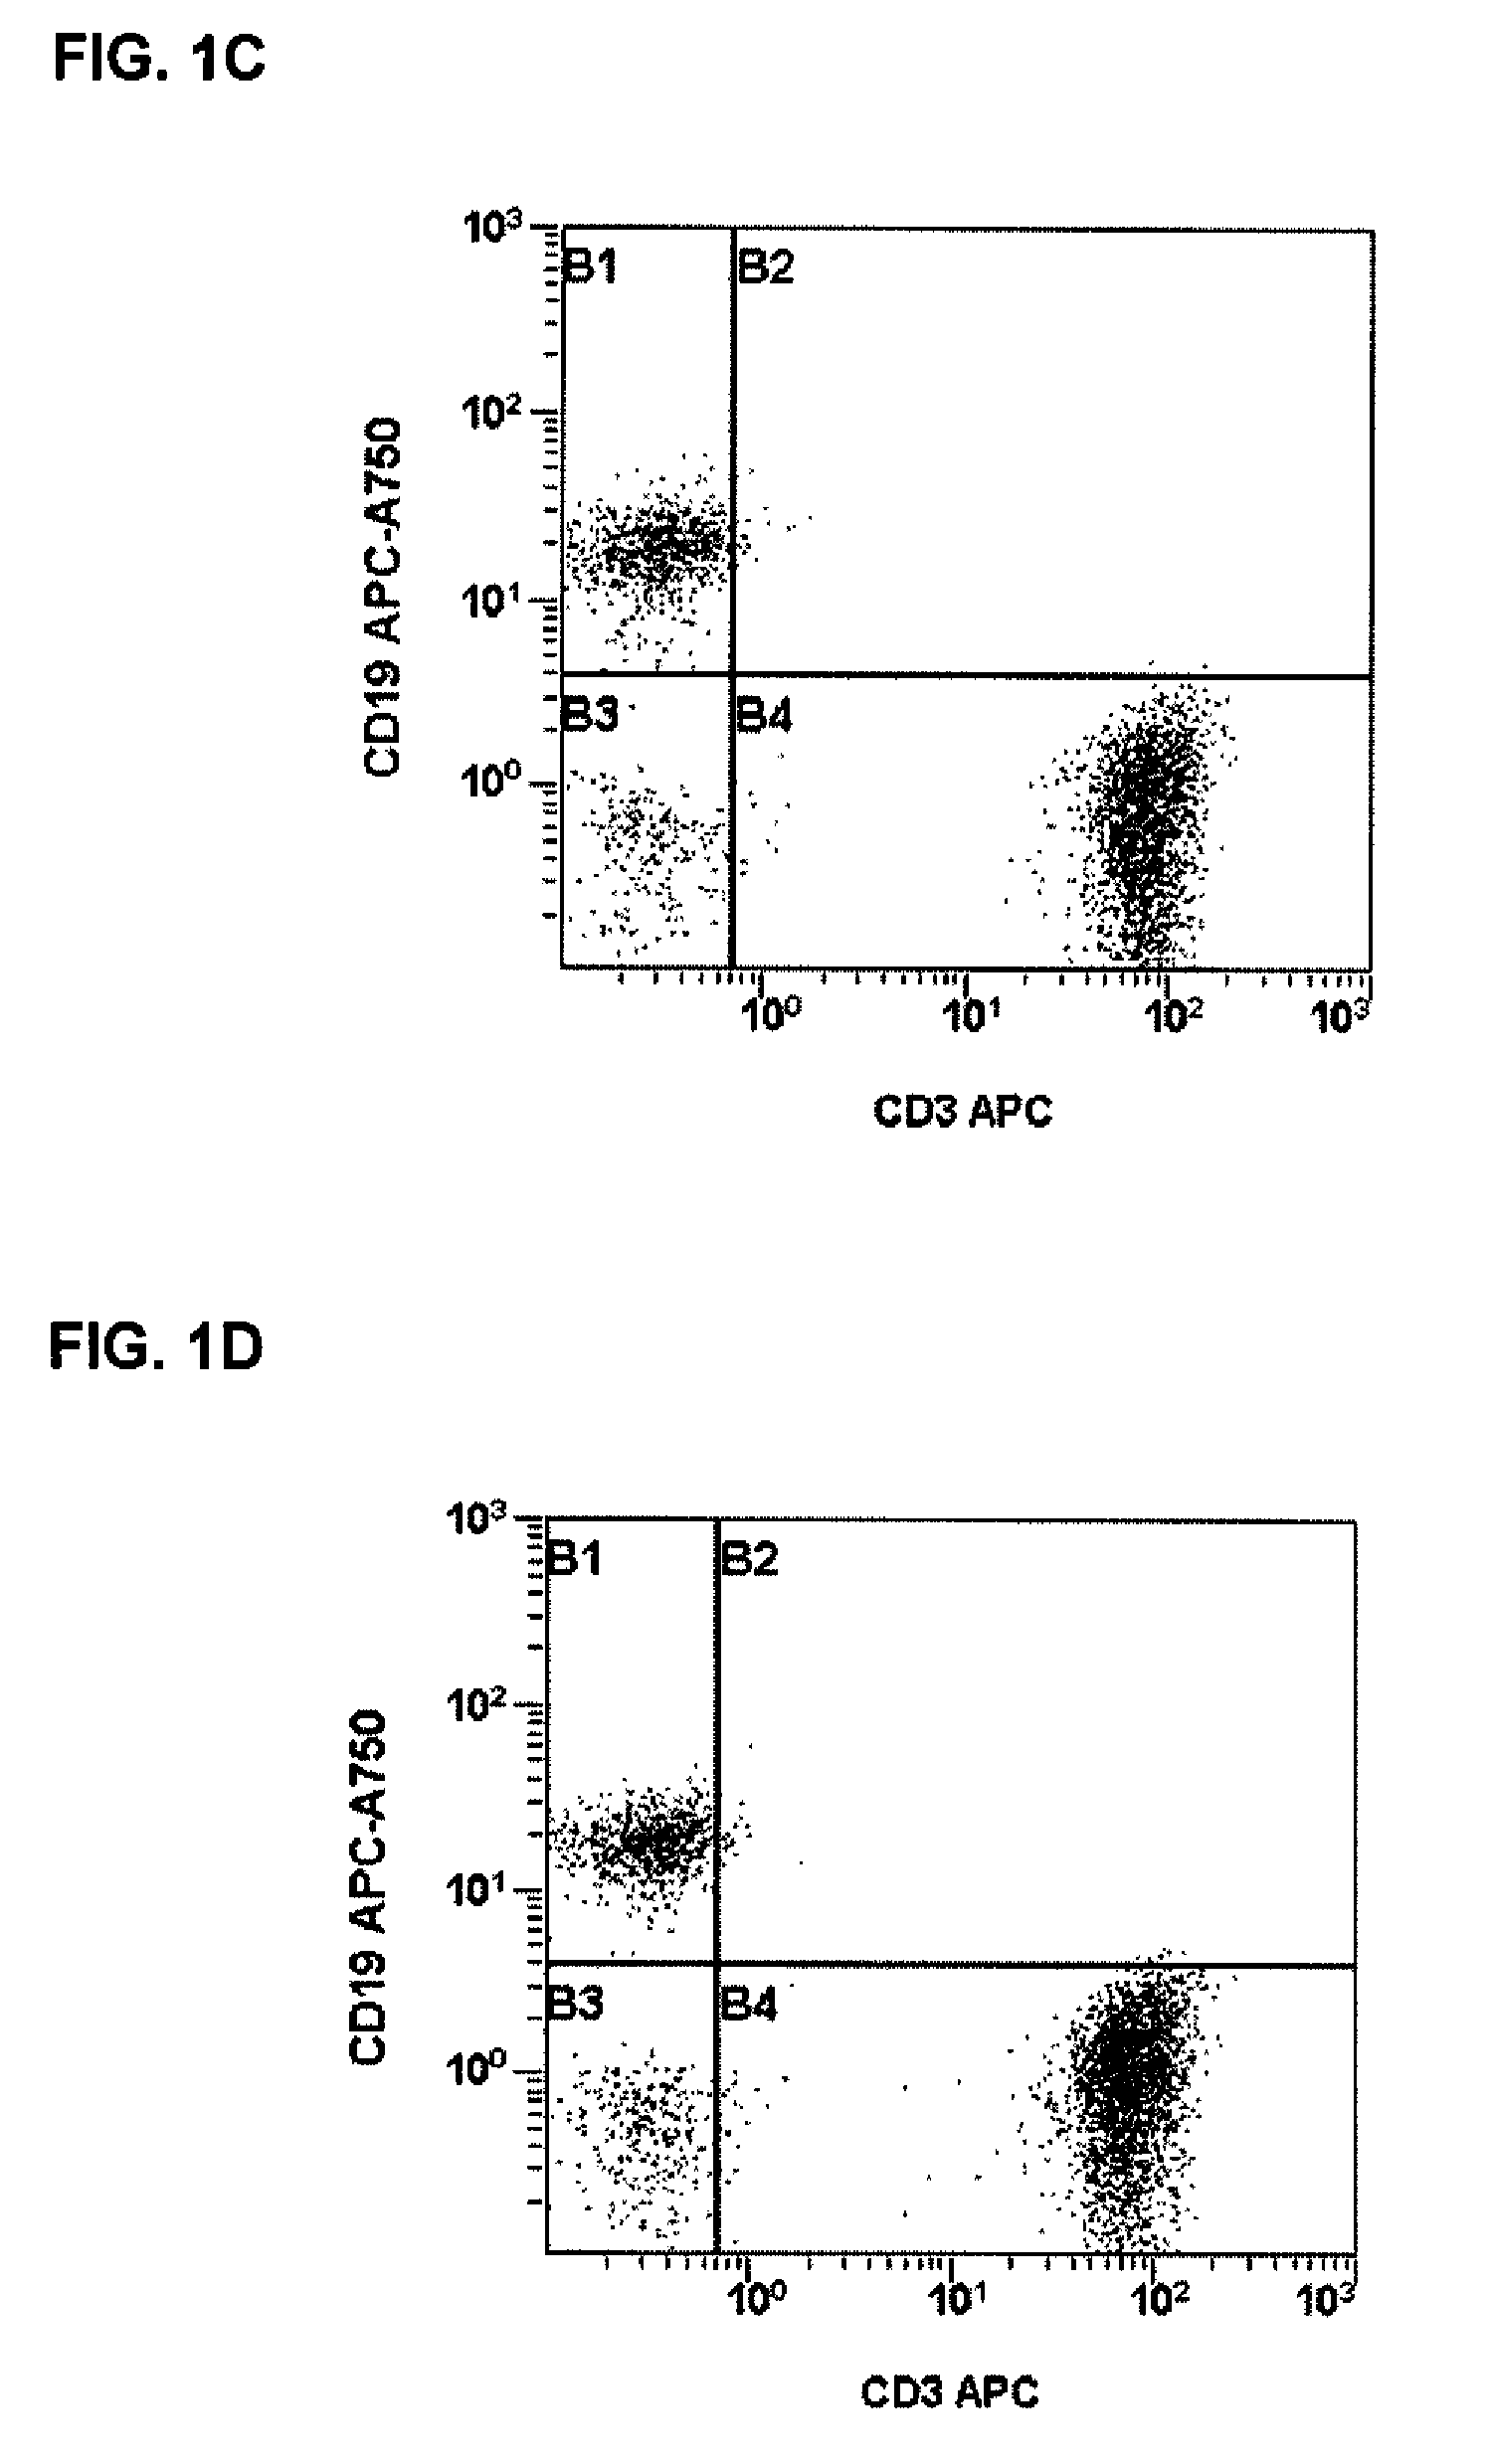 Multicolor flow cytometry compositions containing unconjugated phycobiliproteins